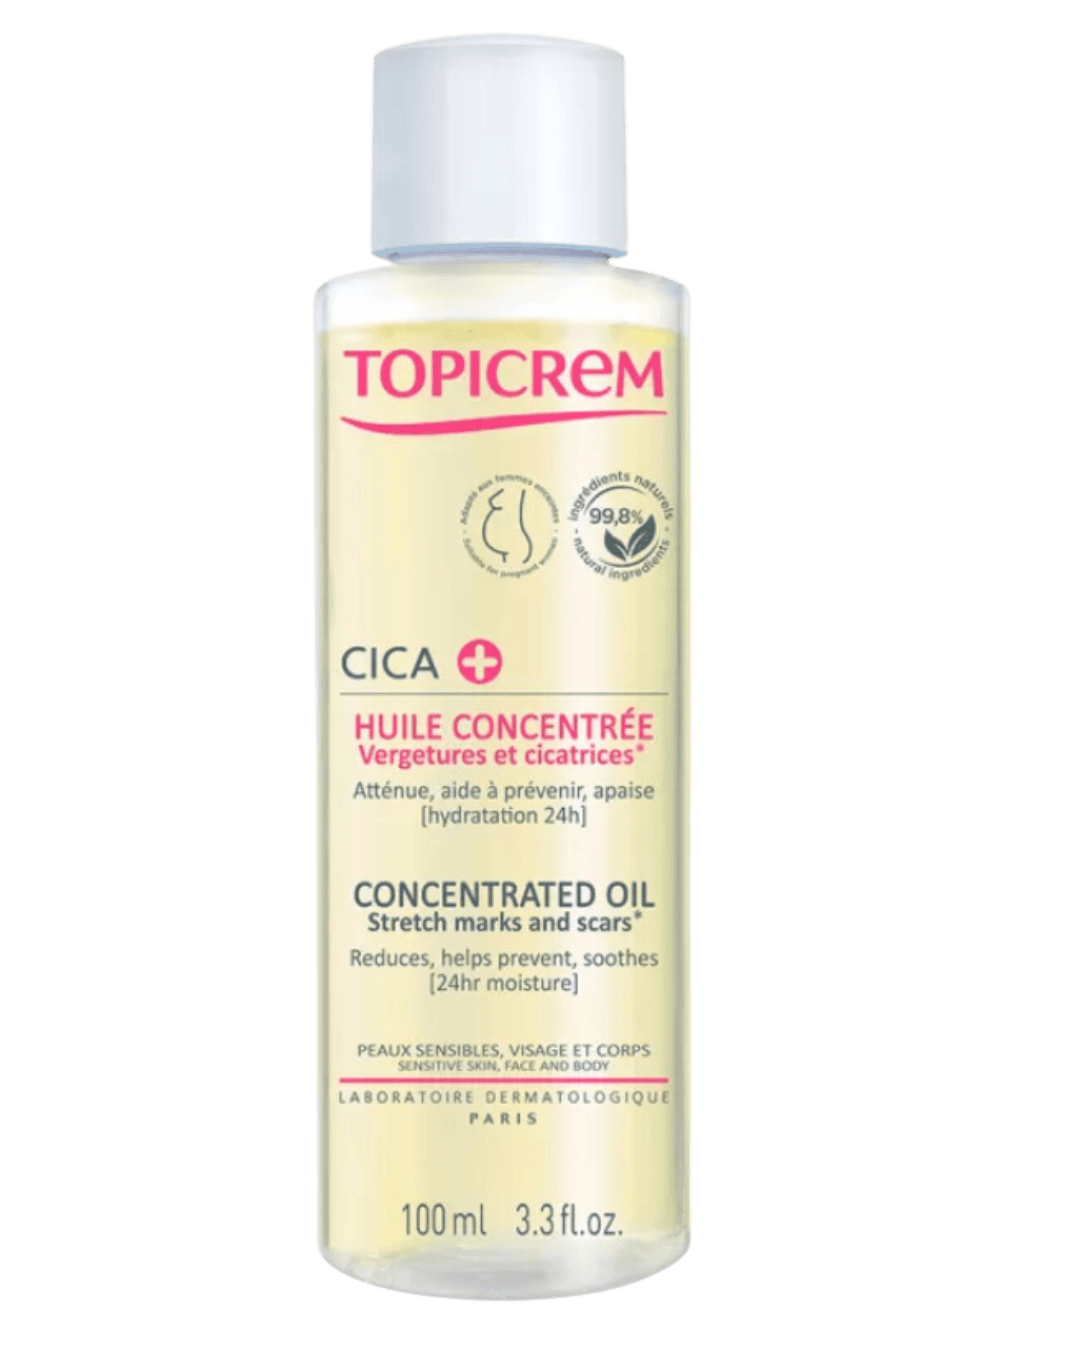 Daily Vanity Beauty Awards 2024 Best Body care Topicrem Cica Concentrate Oil Voted By Beauty Experts